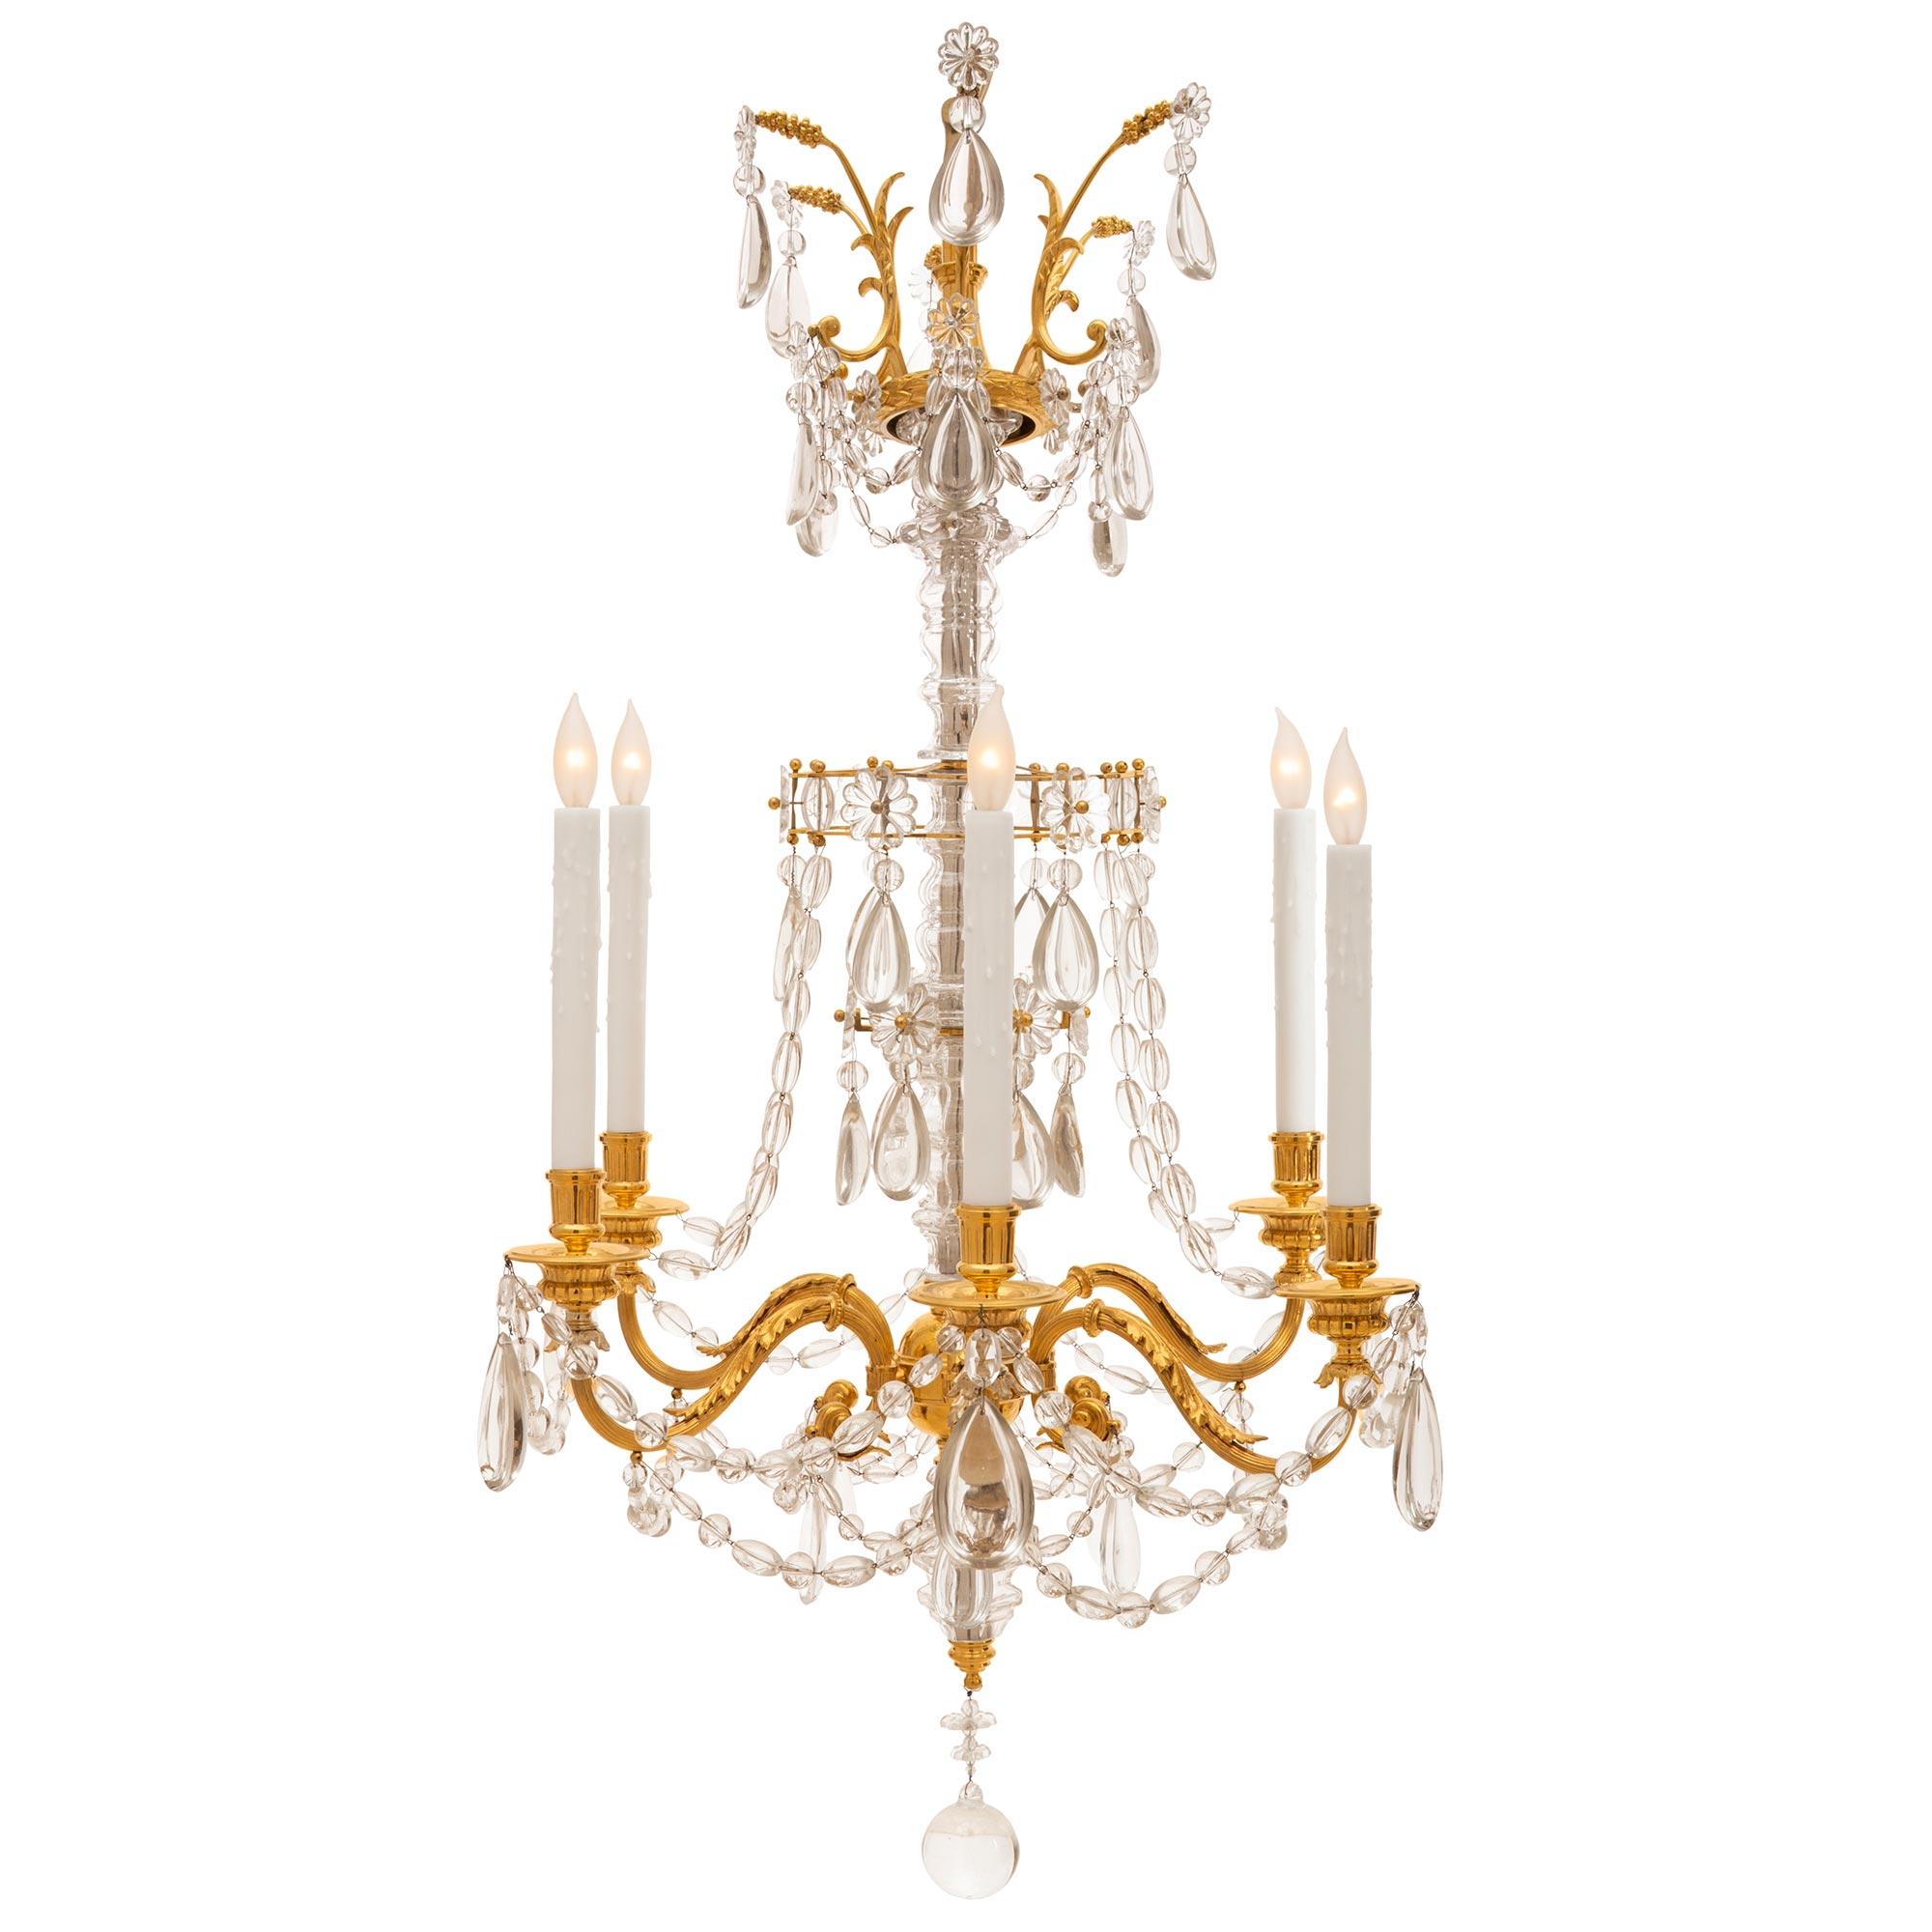 A very elegant French mid 19th century Louis XVI st. Marie Antoinette Baccarat crystal chandelier. With six S scrolled ormolu arms joined by crystal garlands accented with tear drop crystal pendants at each finely chased bobeches. All above a